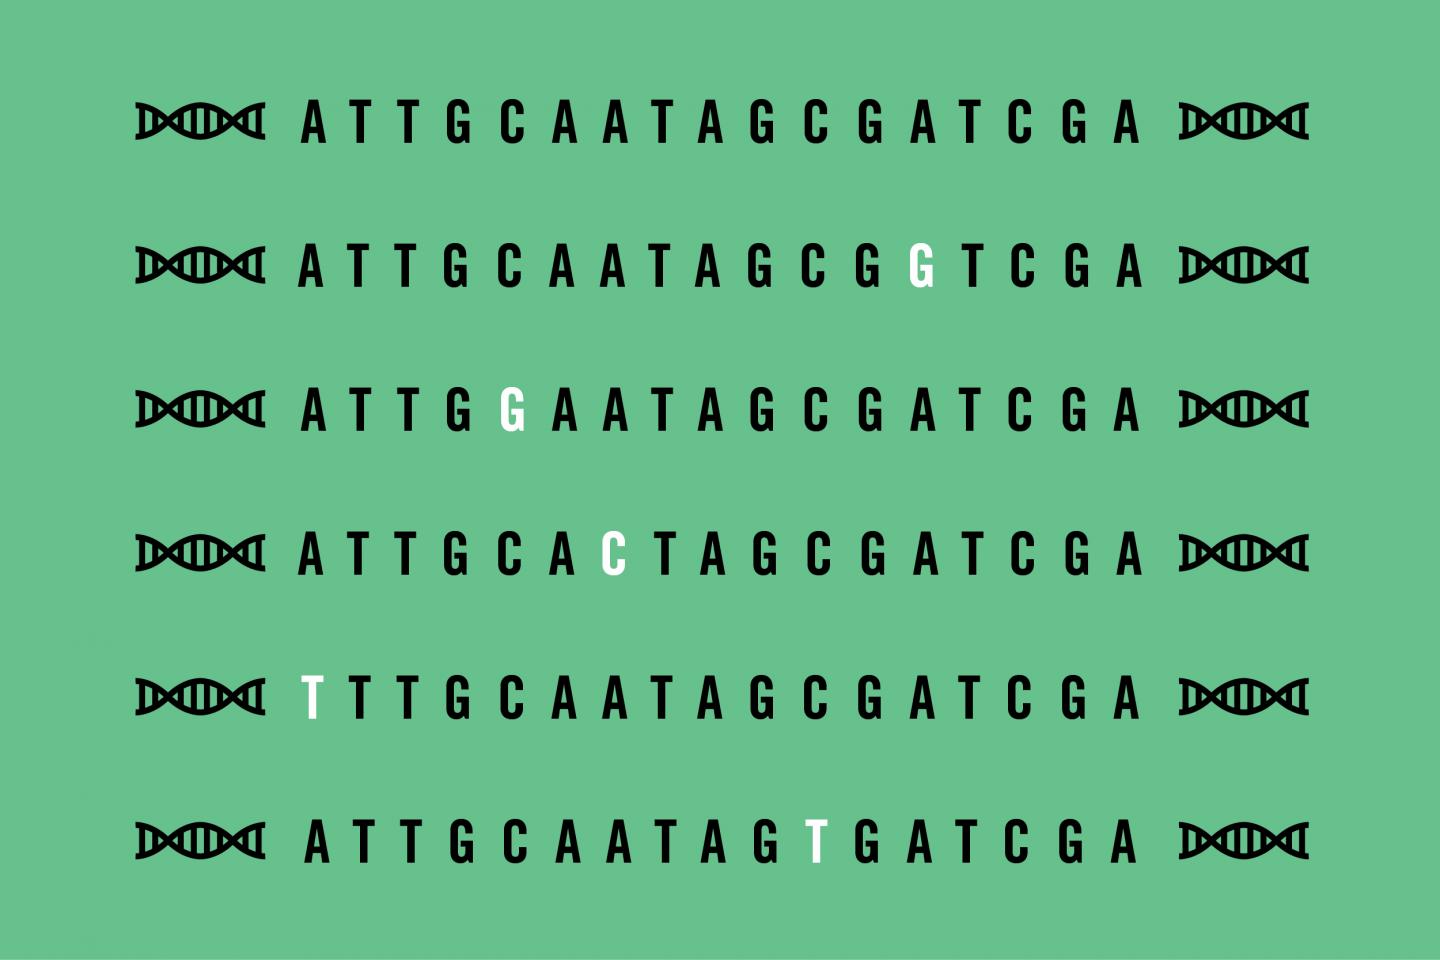 New Technique to Create Sets of DNA Sequences